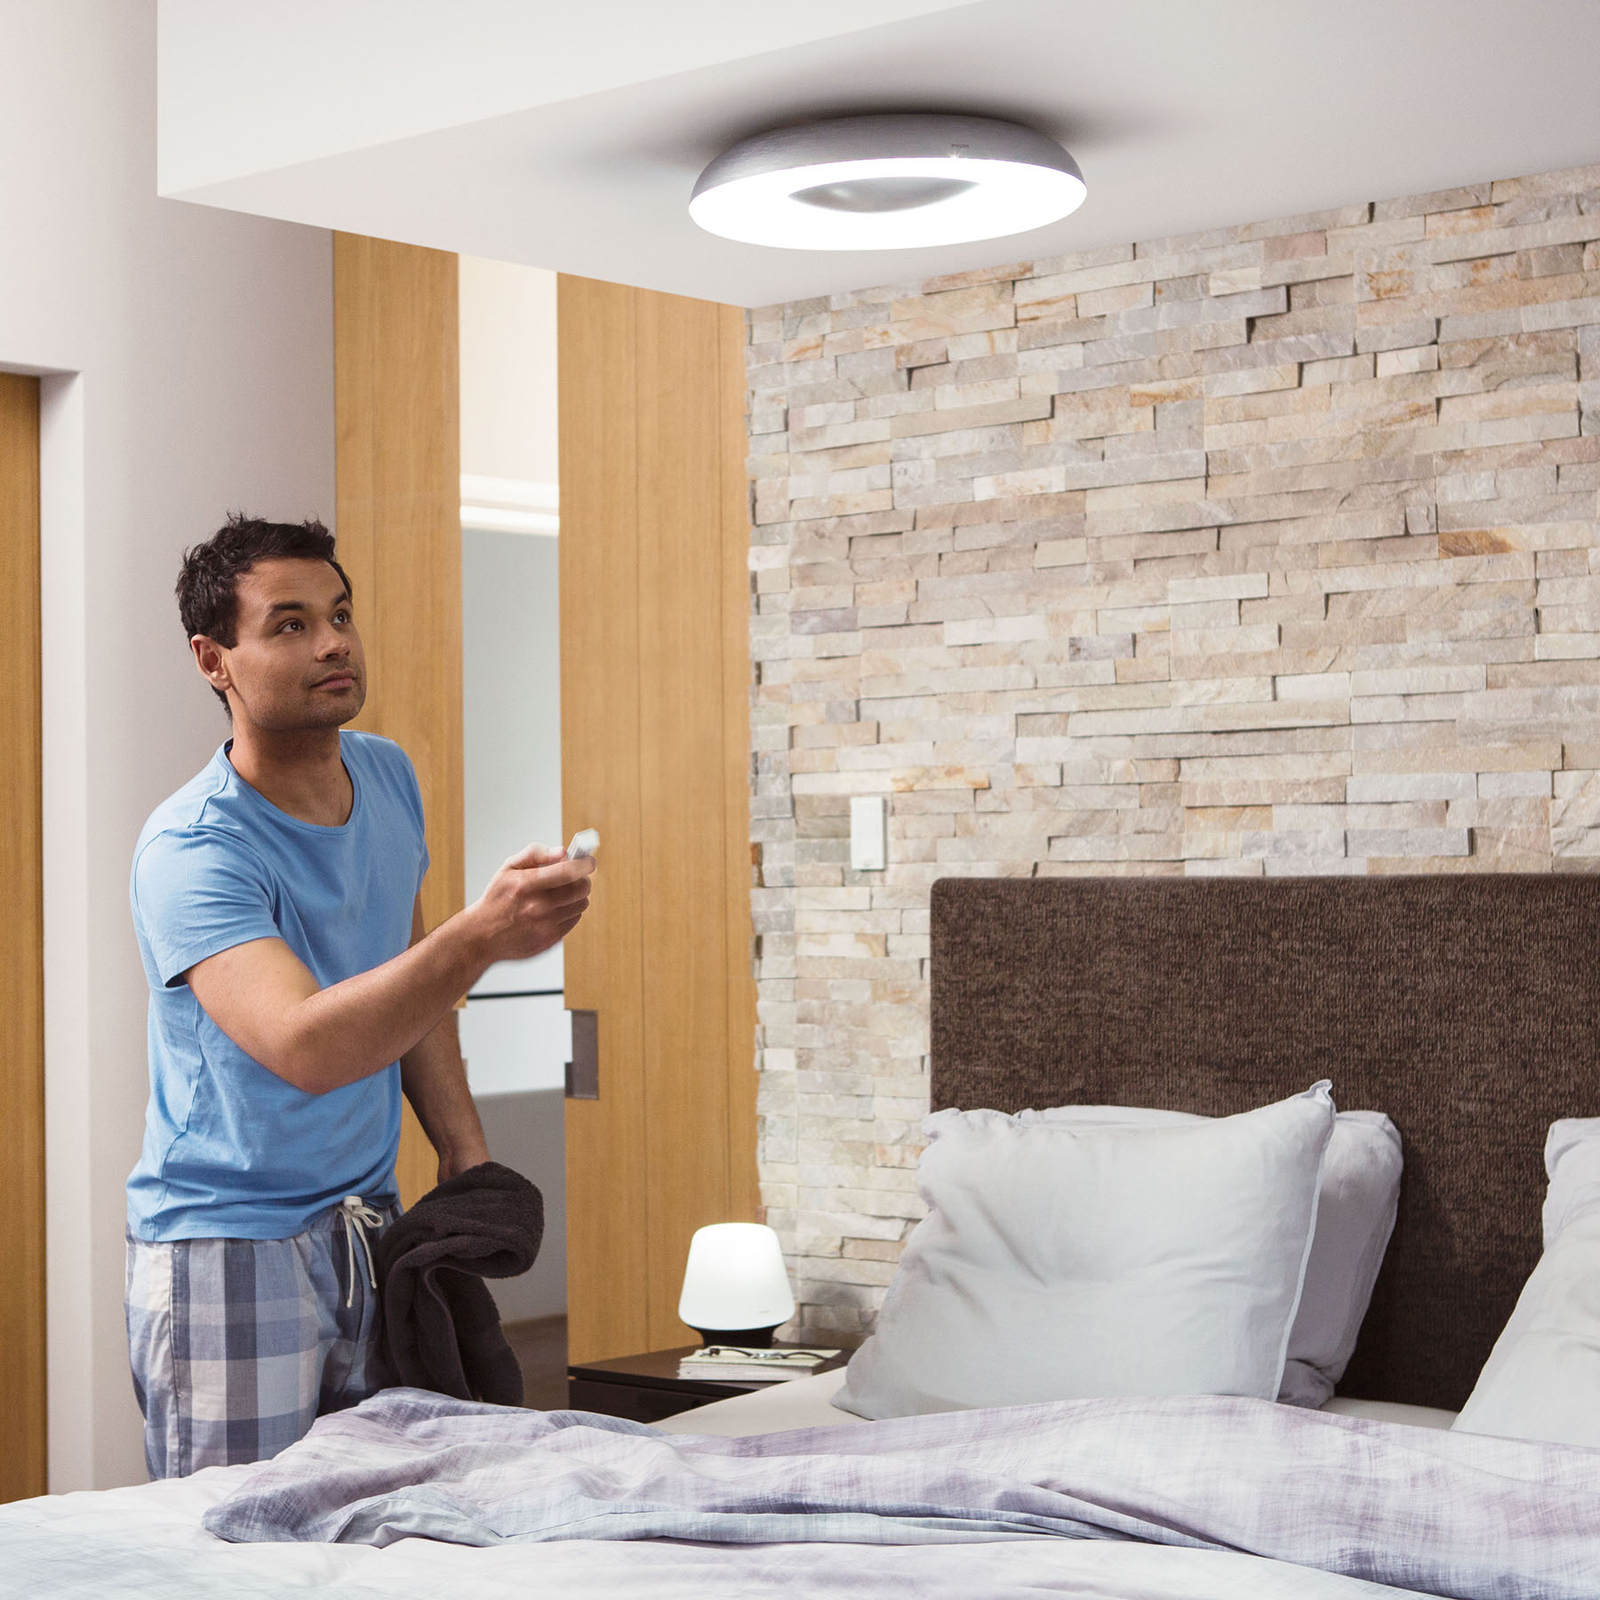 Philips Hue White Ambiance Still ceiling lamp alu